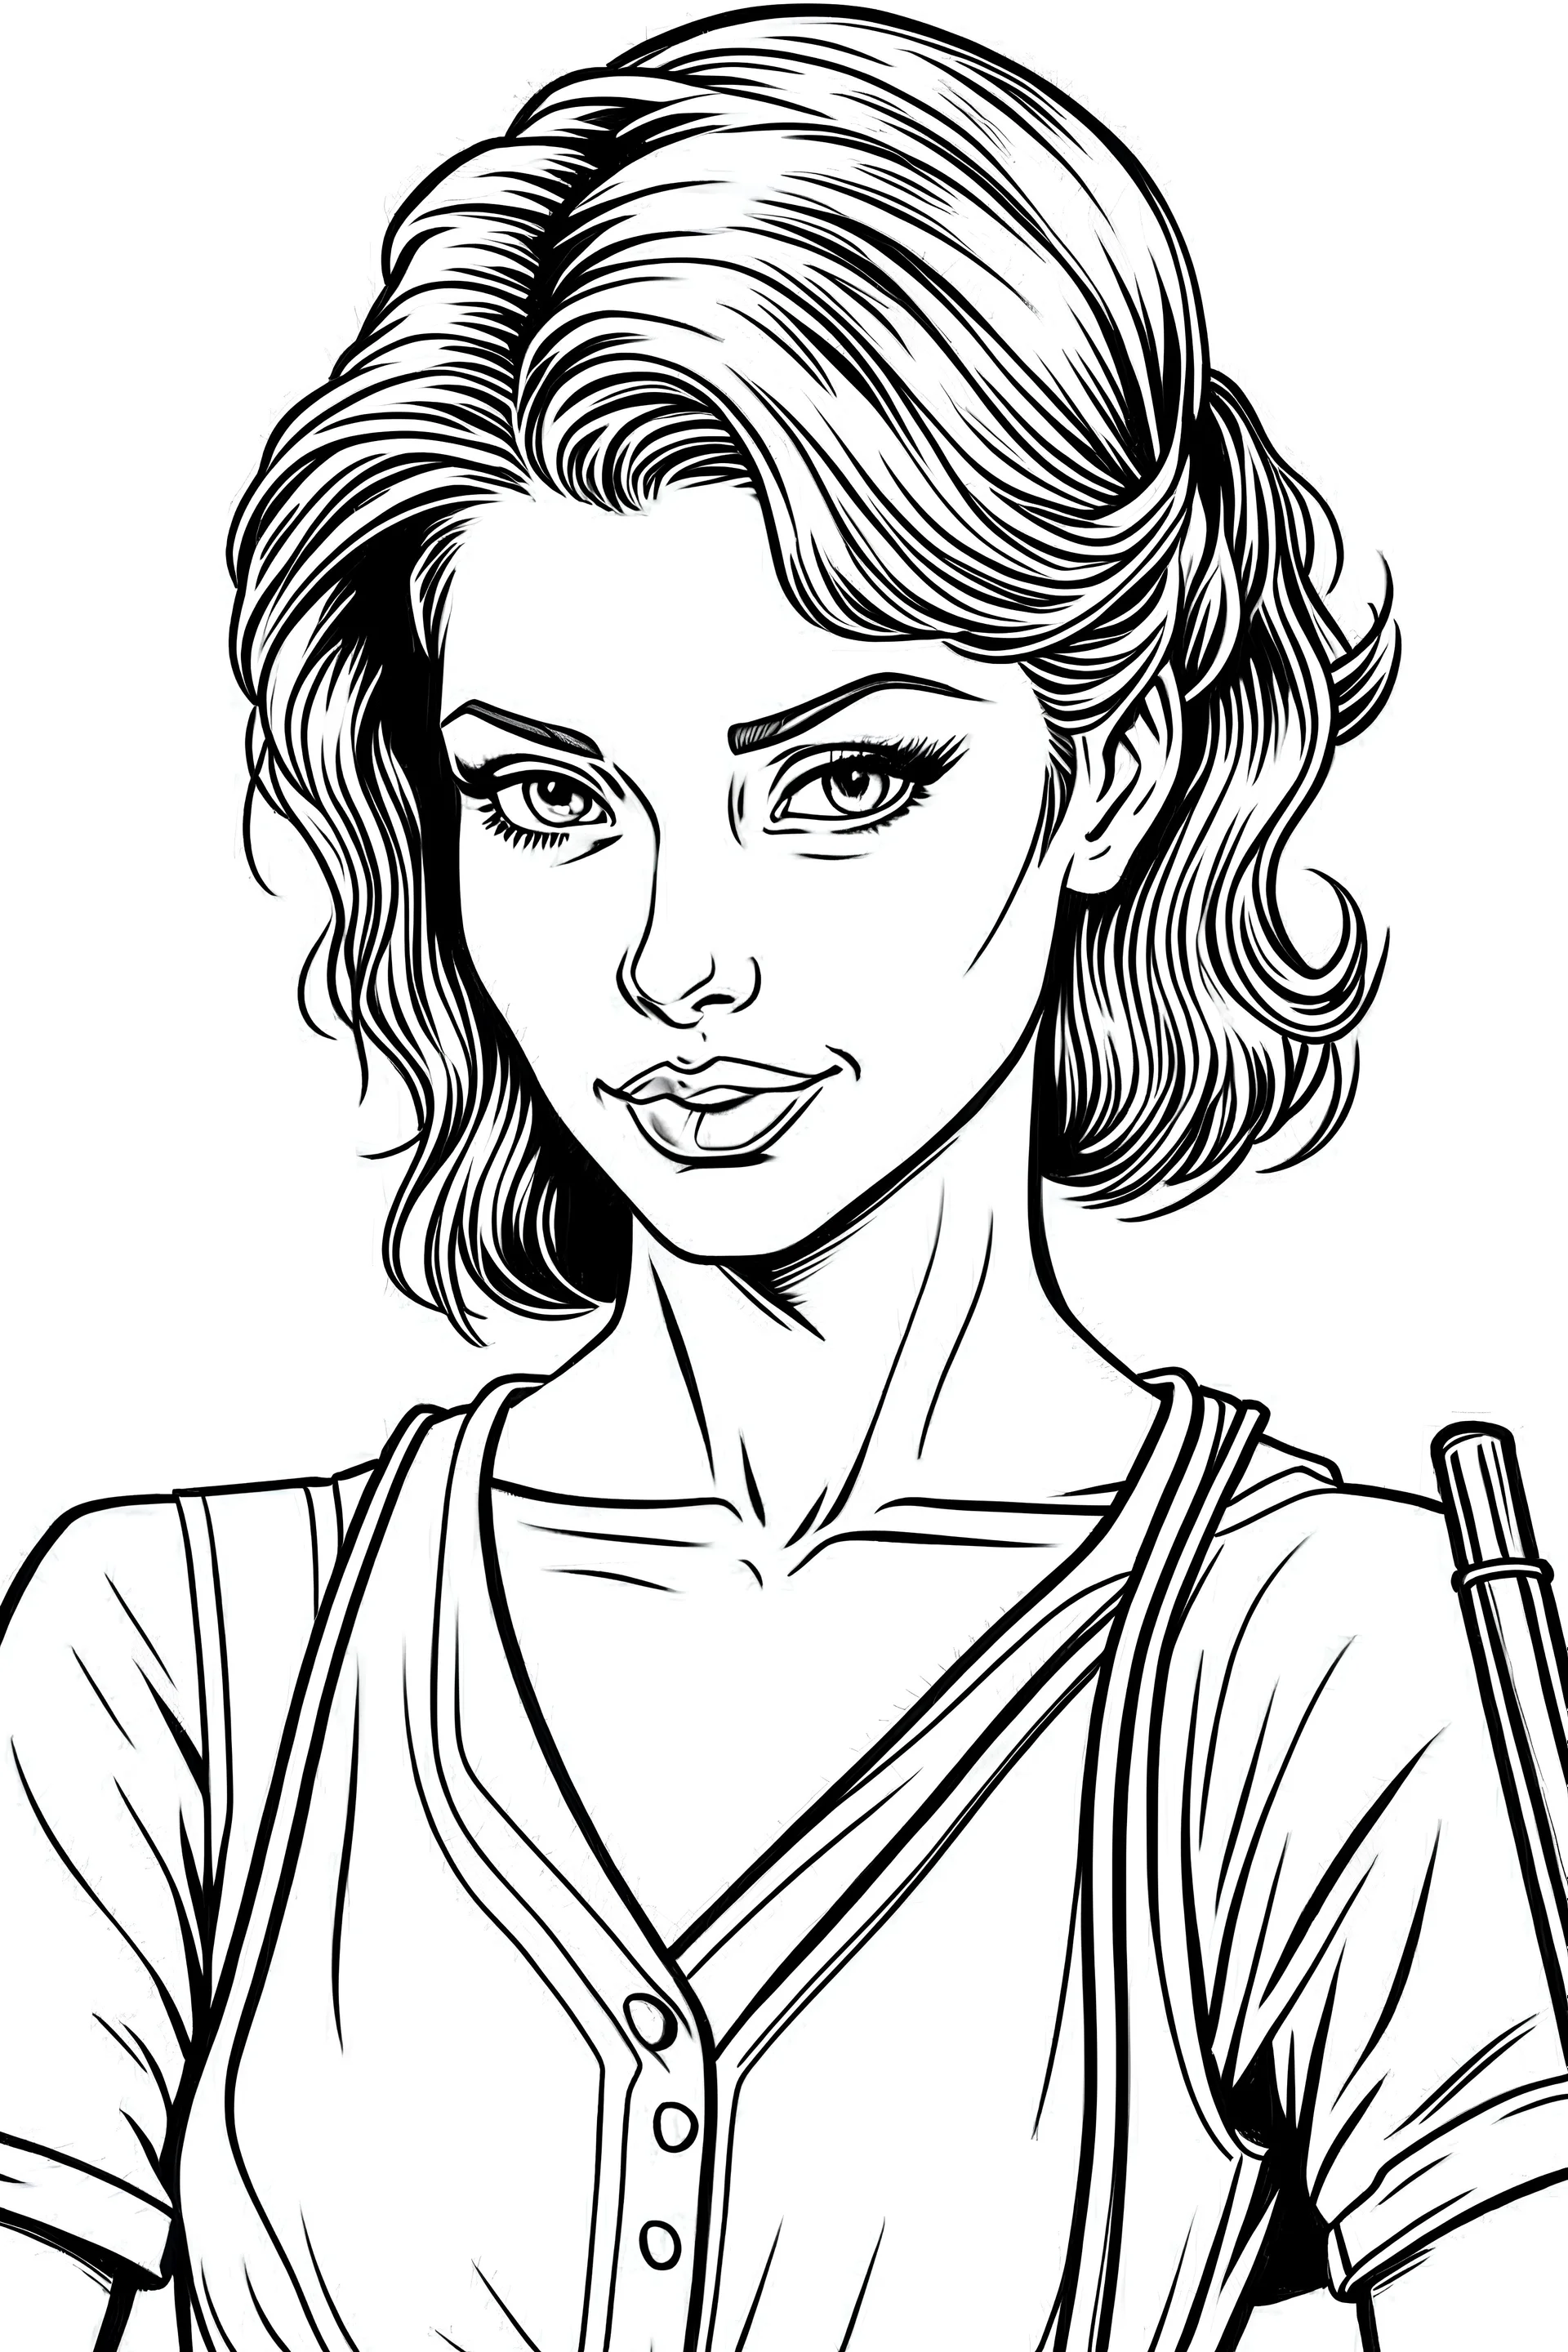 CLEANER PRETTY woman COLORING PAGE CLEAR LINES